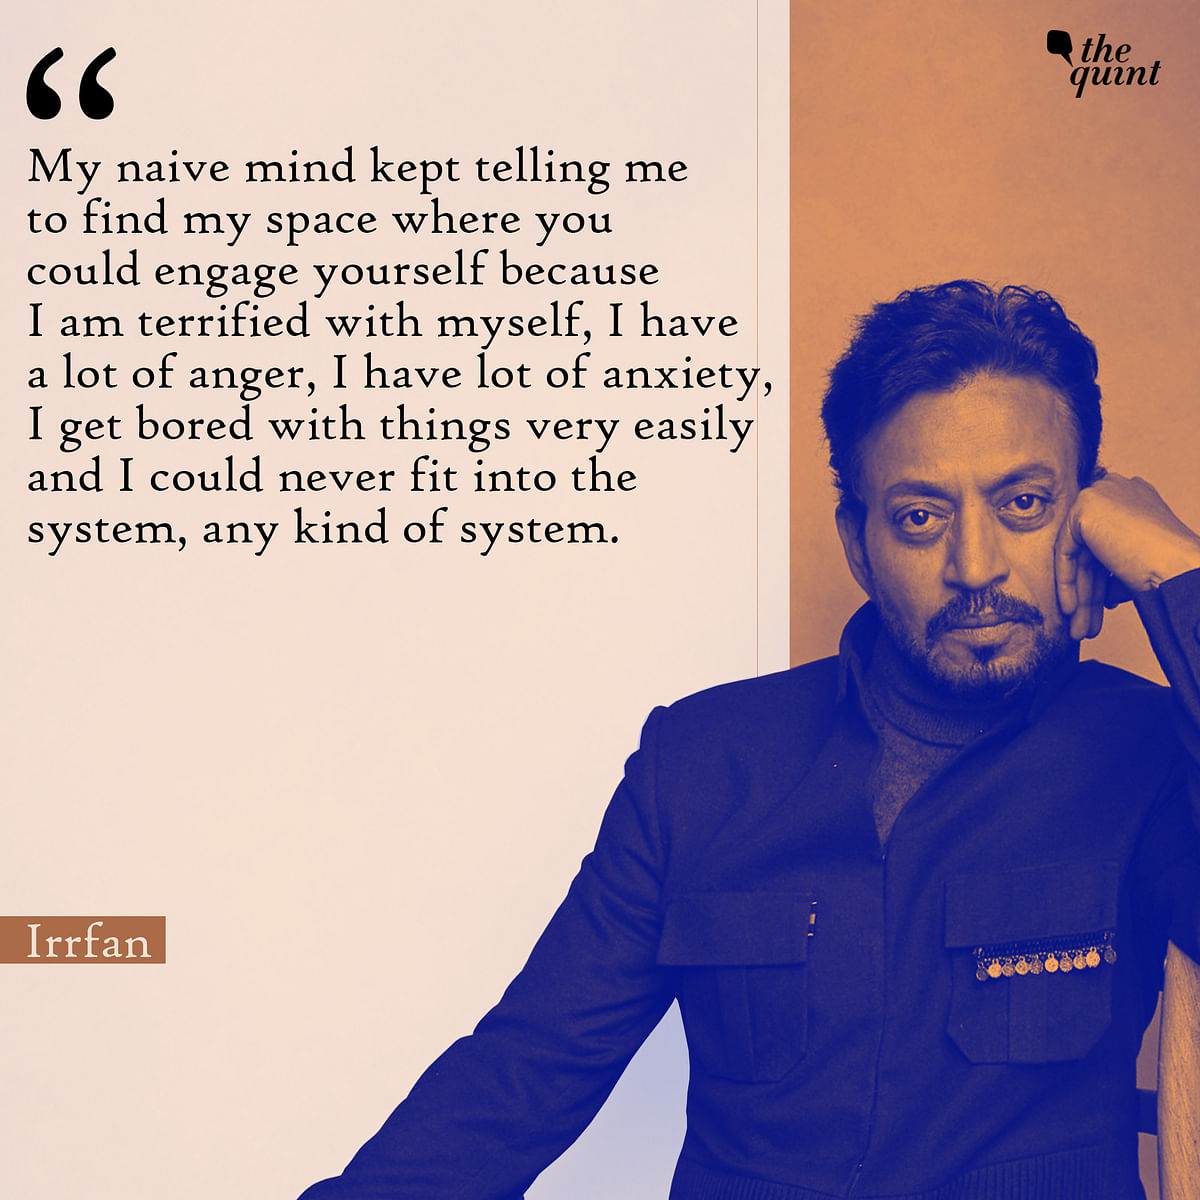 Here are some of Irrfan Khan’s words of wisdom.